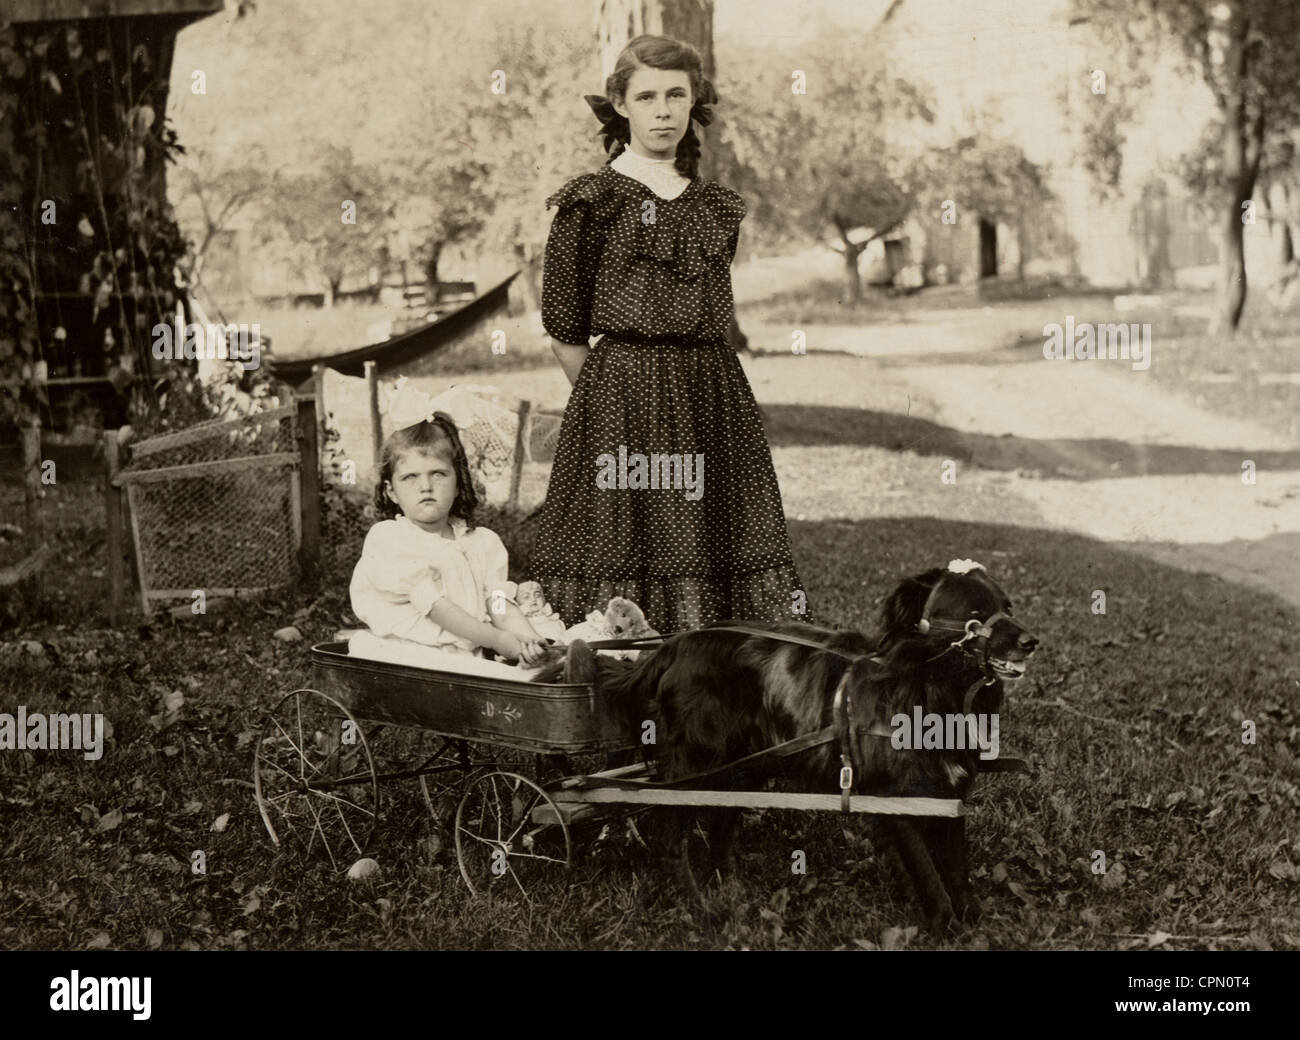 Older Sister with Younger Sister in Dog Drawn Toy Wagon Stock Photo